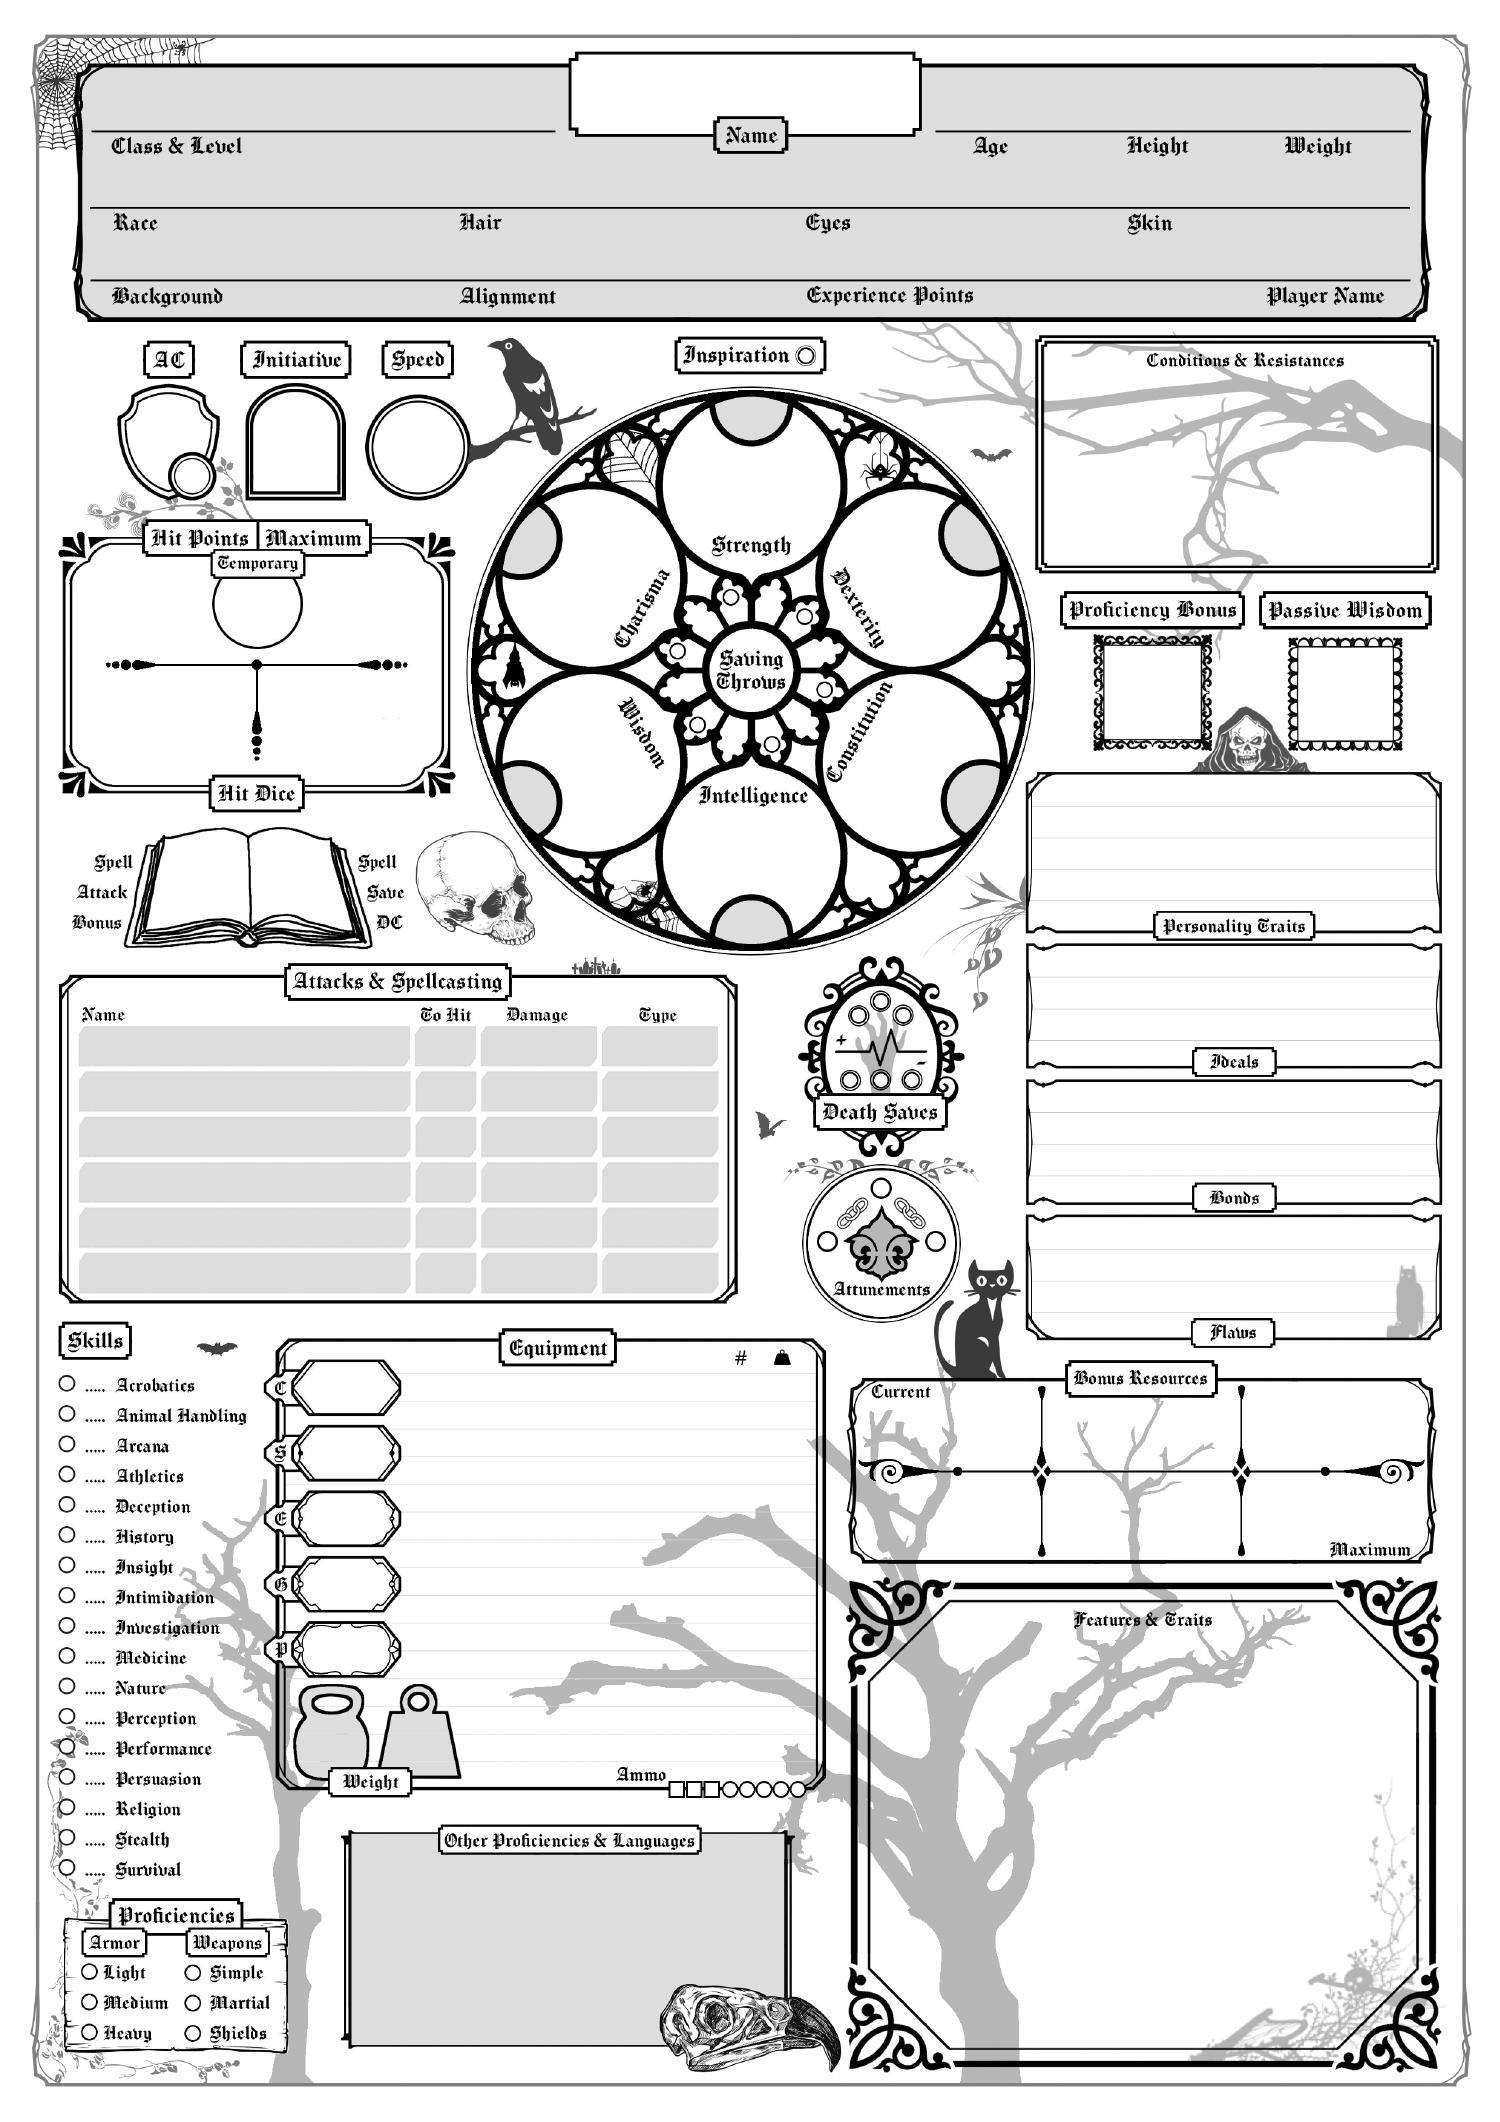 5e Gothic Character Sheet Fillable Pdf Docdroid